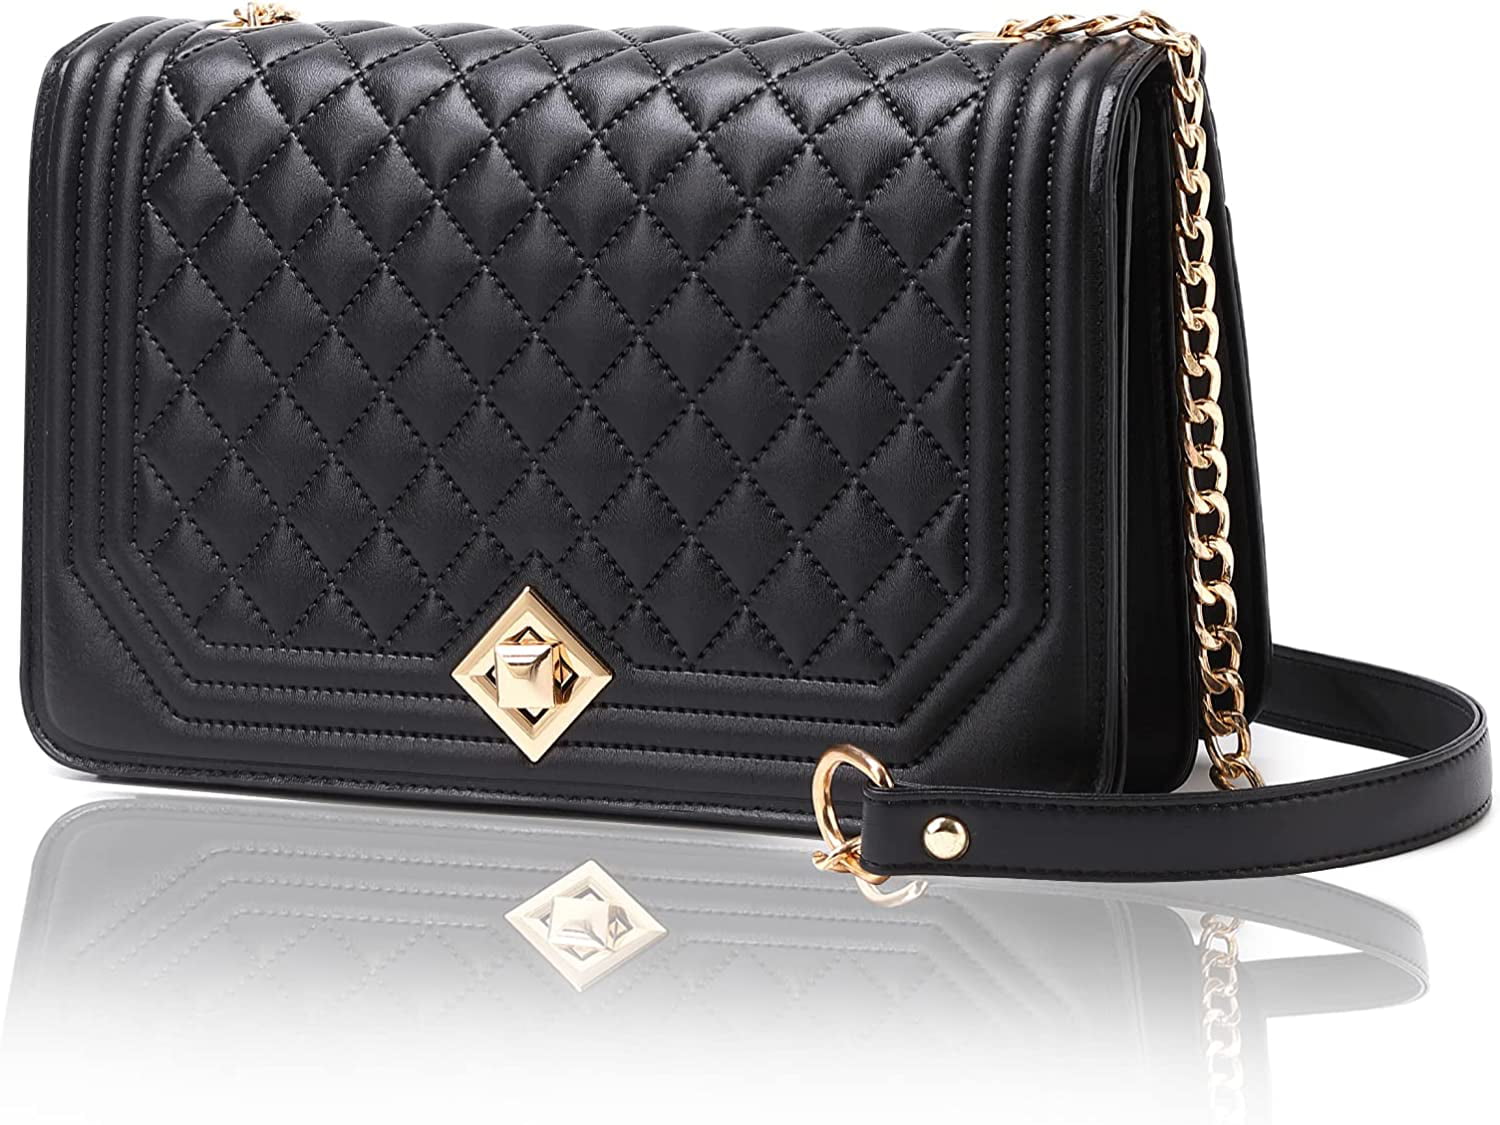 Black womens evening bags with chain